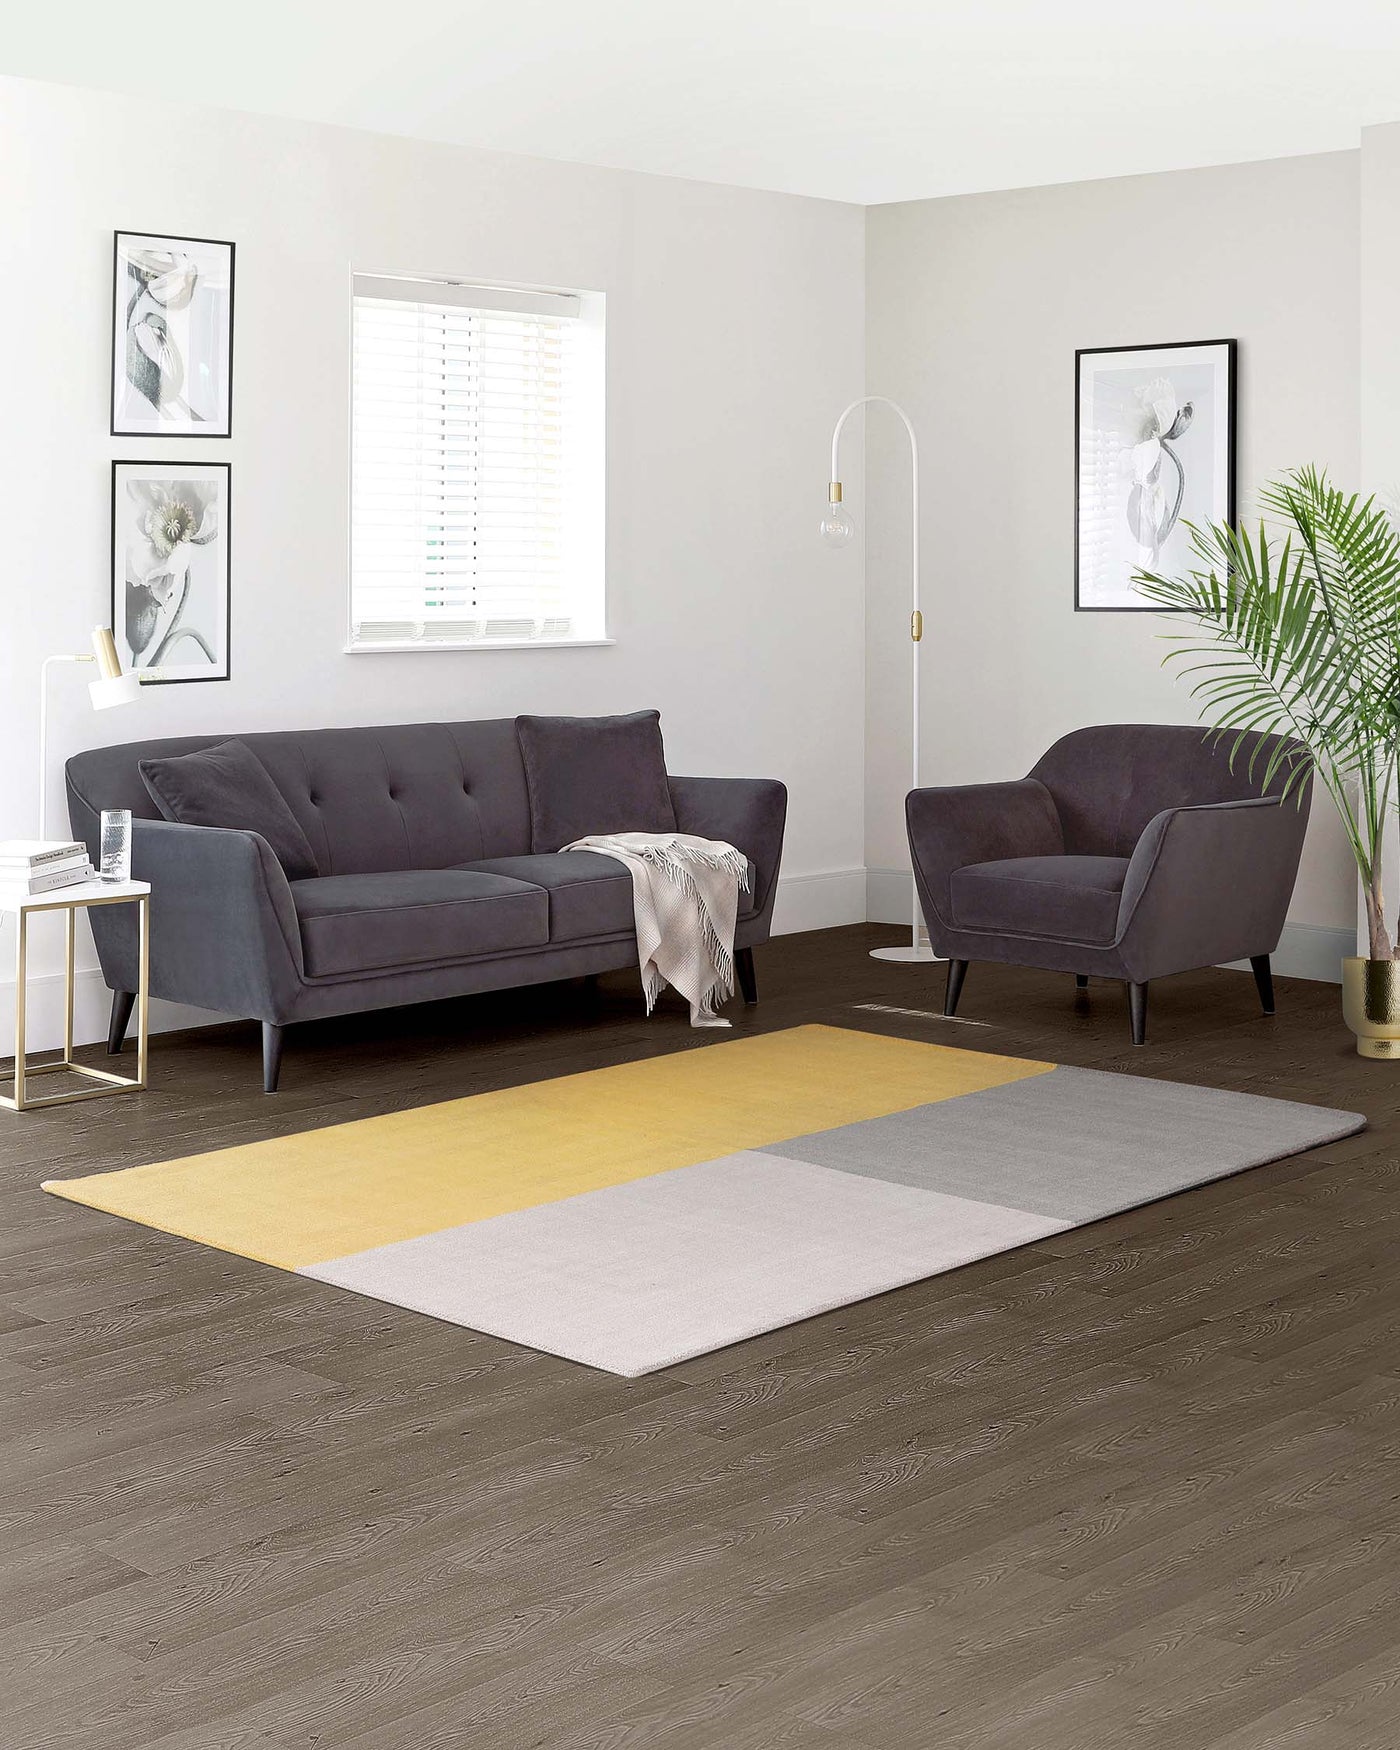 Contemporary living room furniture set featuring a three-seater sofa and a matching armchair upholstered in grey fabric with tufting on the back cushions. A white and gold minimalist side table sits beside the sofa.